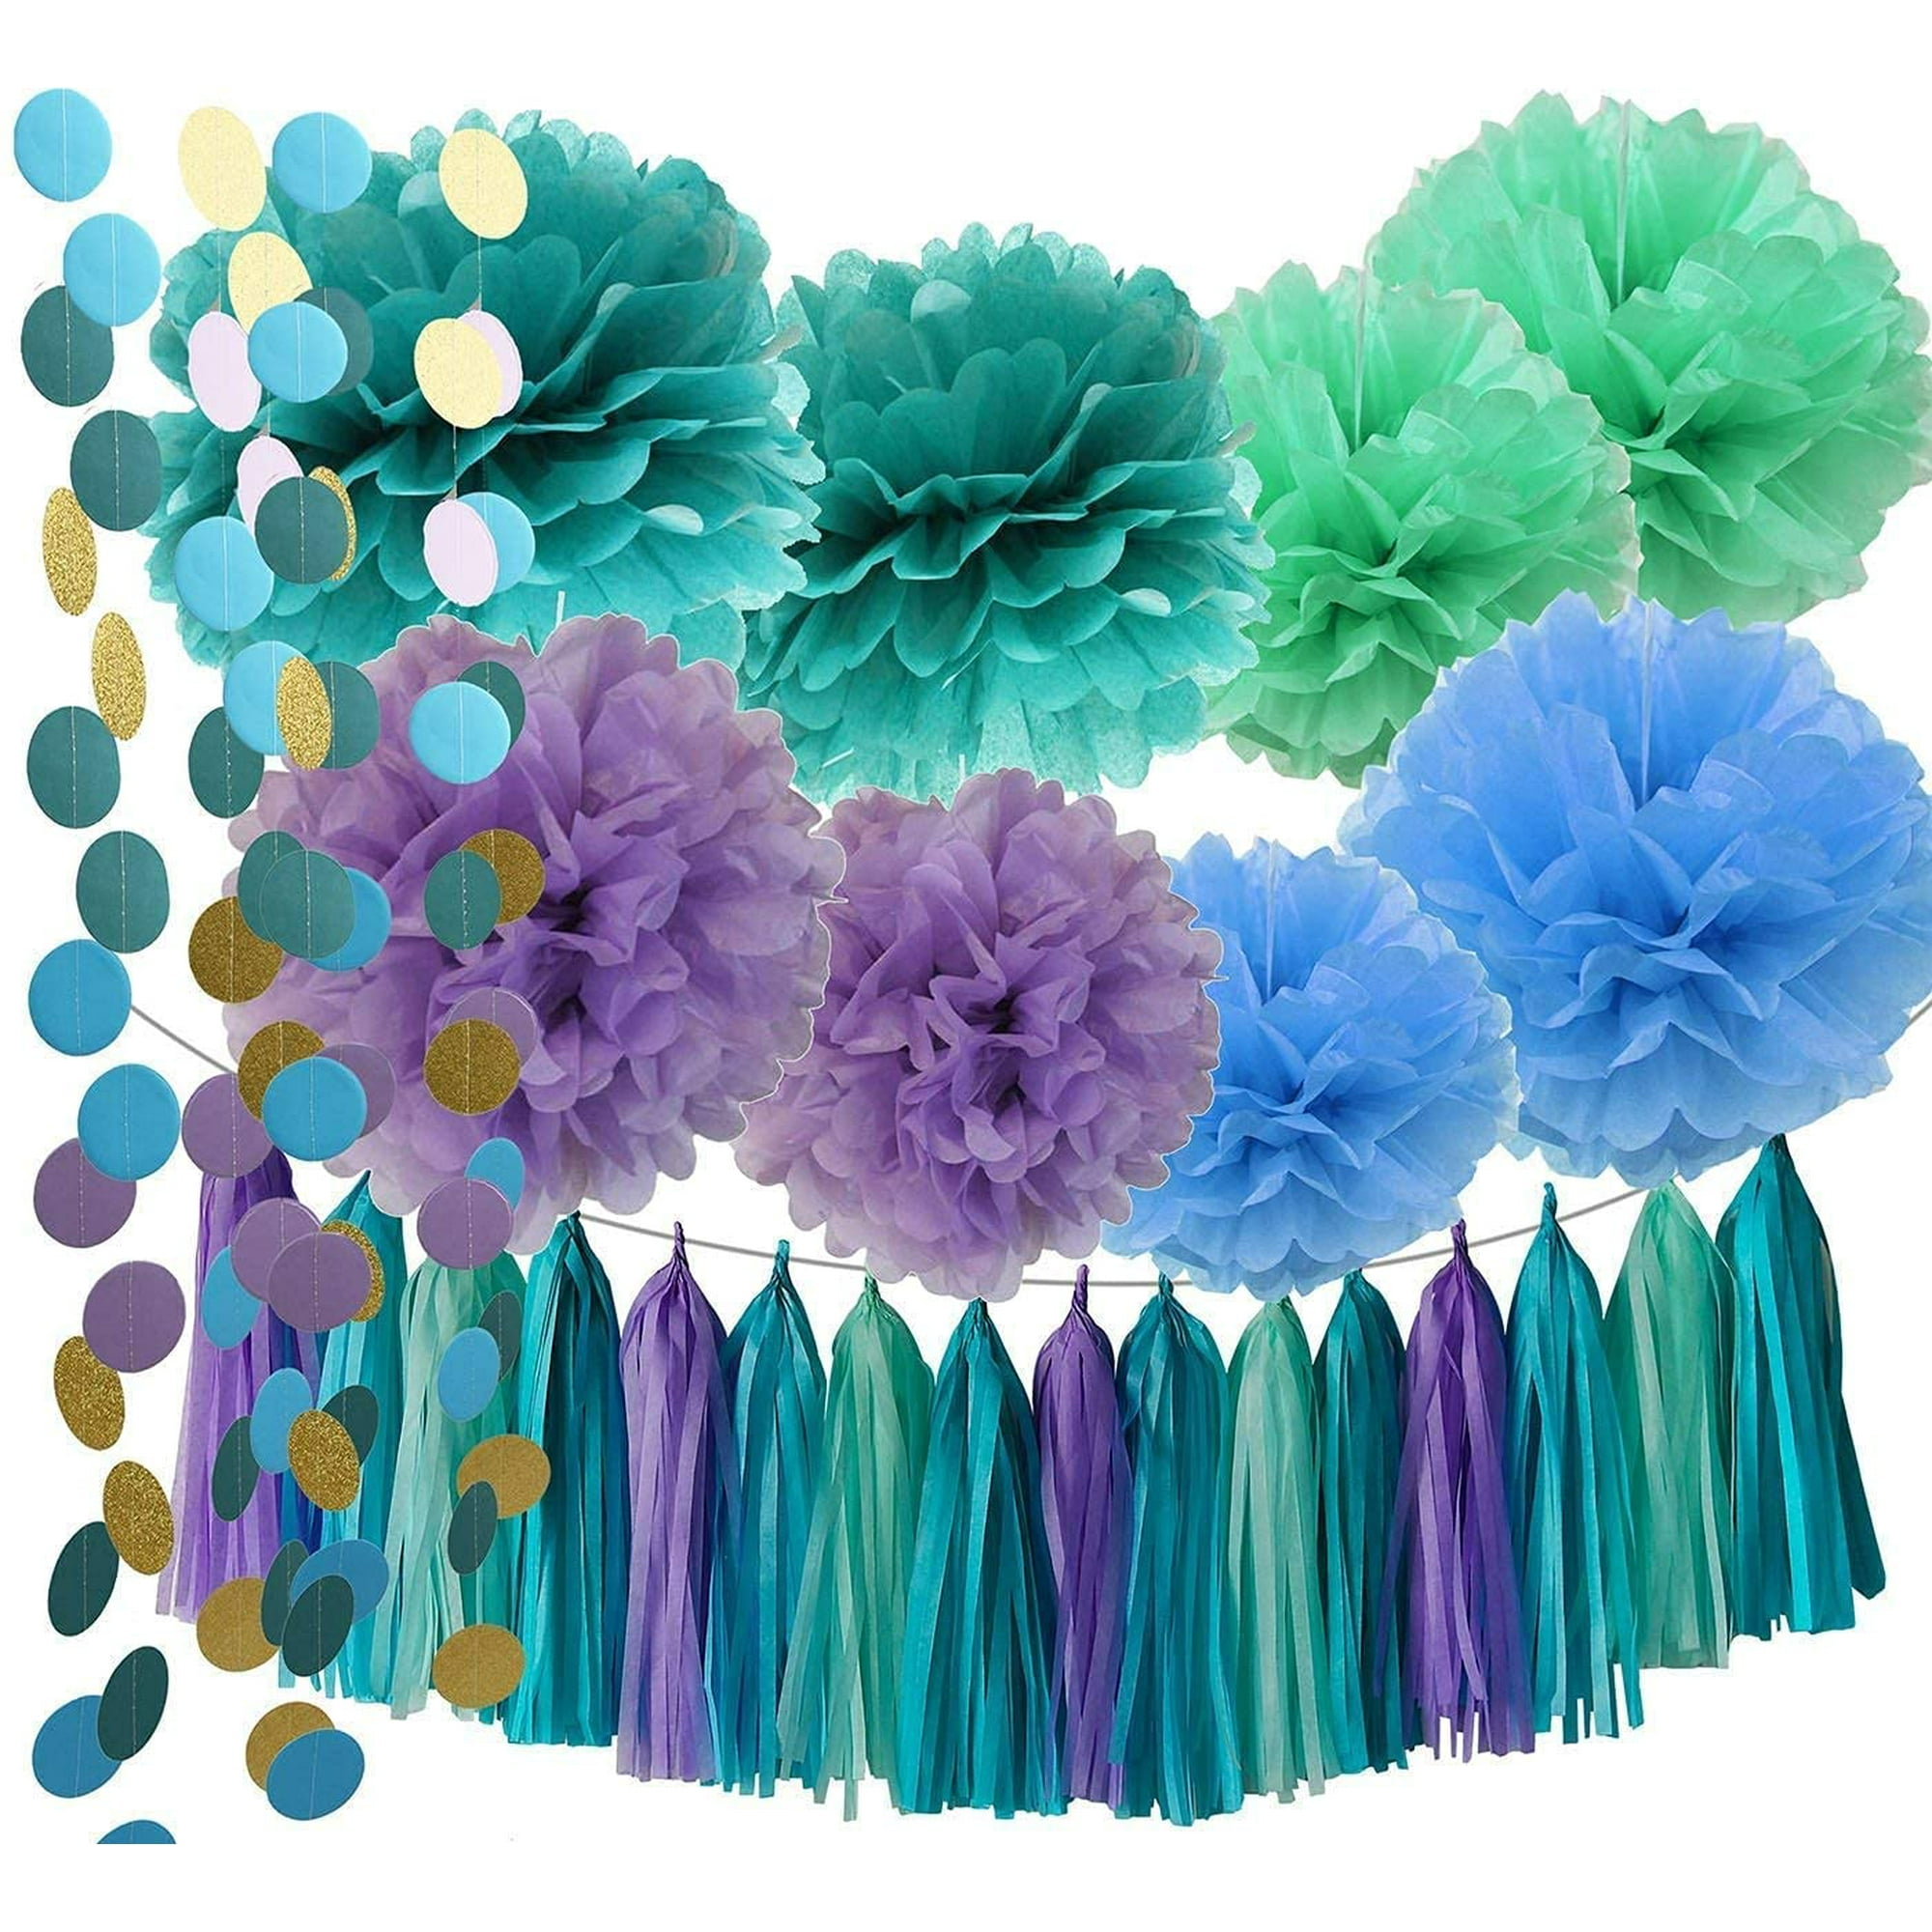 Under The Sea Party Supplies/Mermaid Decorations Teal Purple Mint